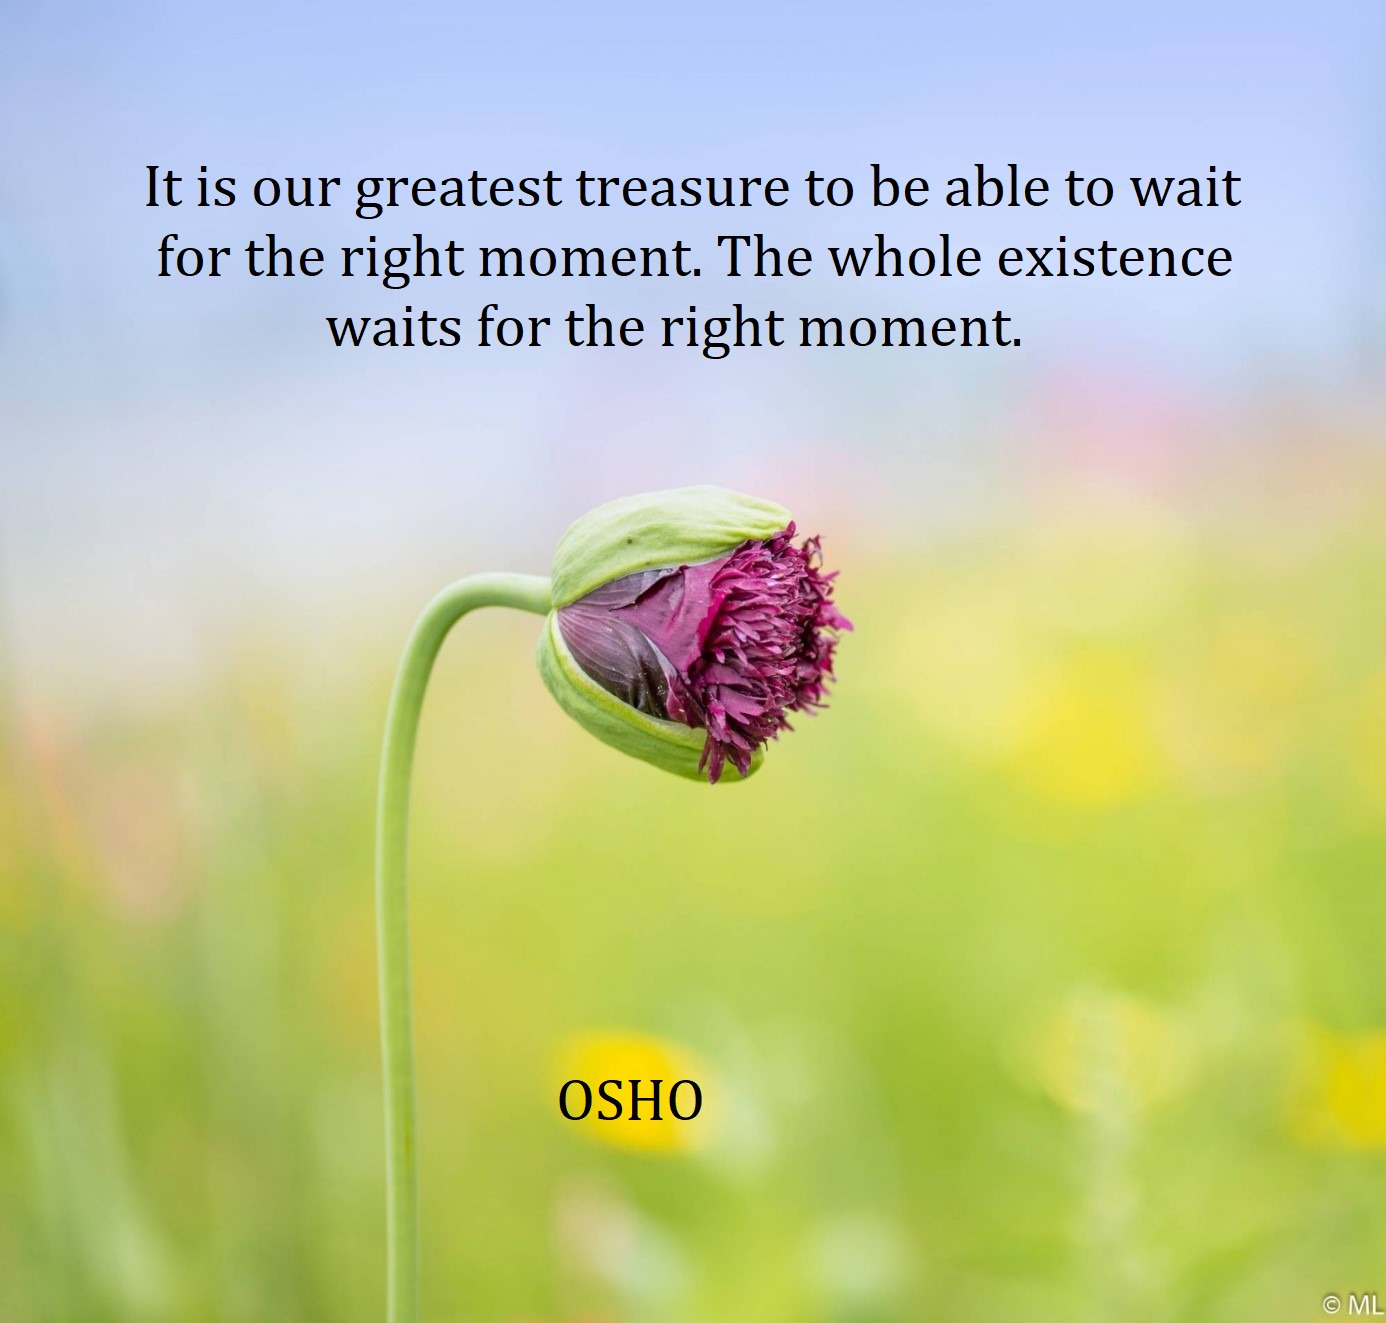 It is our greatest treasure to be able to wait for the right moment. The whole existence waits for the right moment.